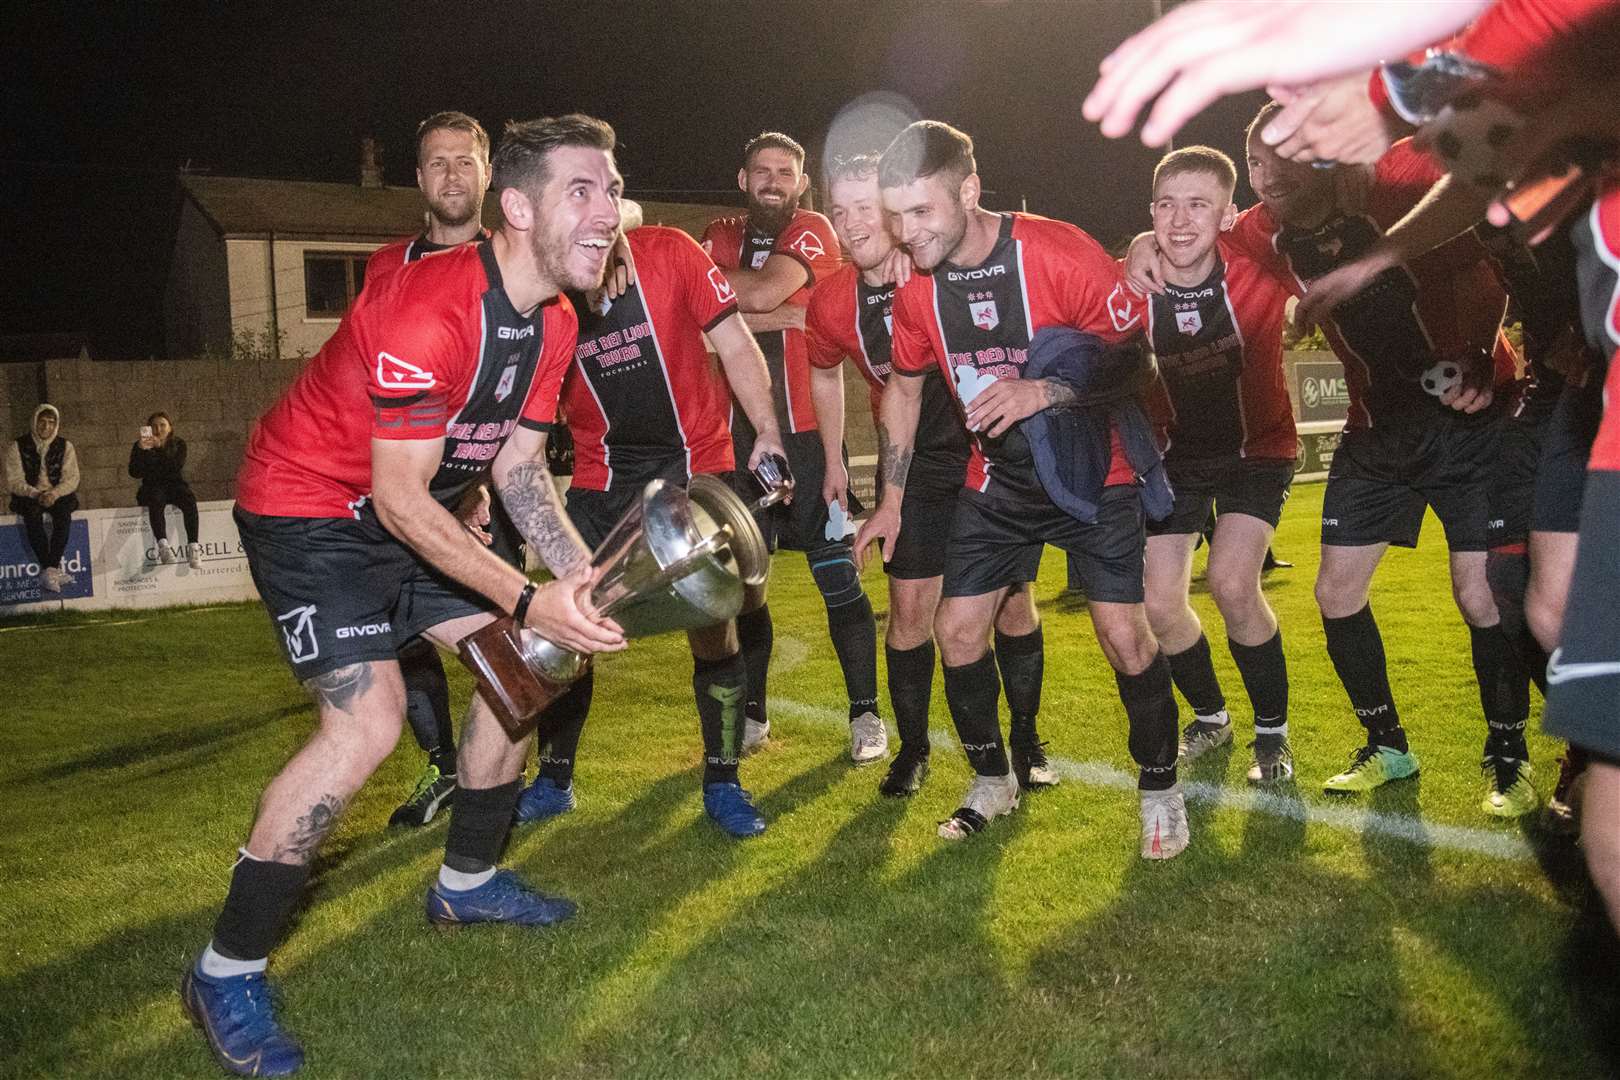 Fochabers skipper Ben Stewart leads the celebrations with the cup. ..Fochabers FC (7) vs Hopeman FC (2) - Mike Simpson Cup Final 2023 - Grant Park, Lossiemouth...Picture: Daniel Forsyth..